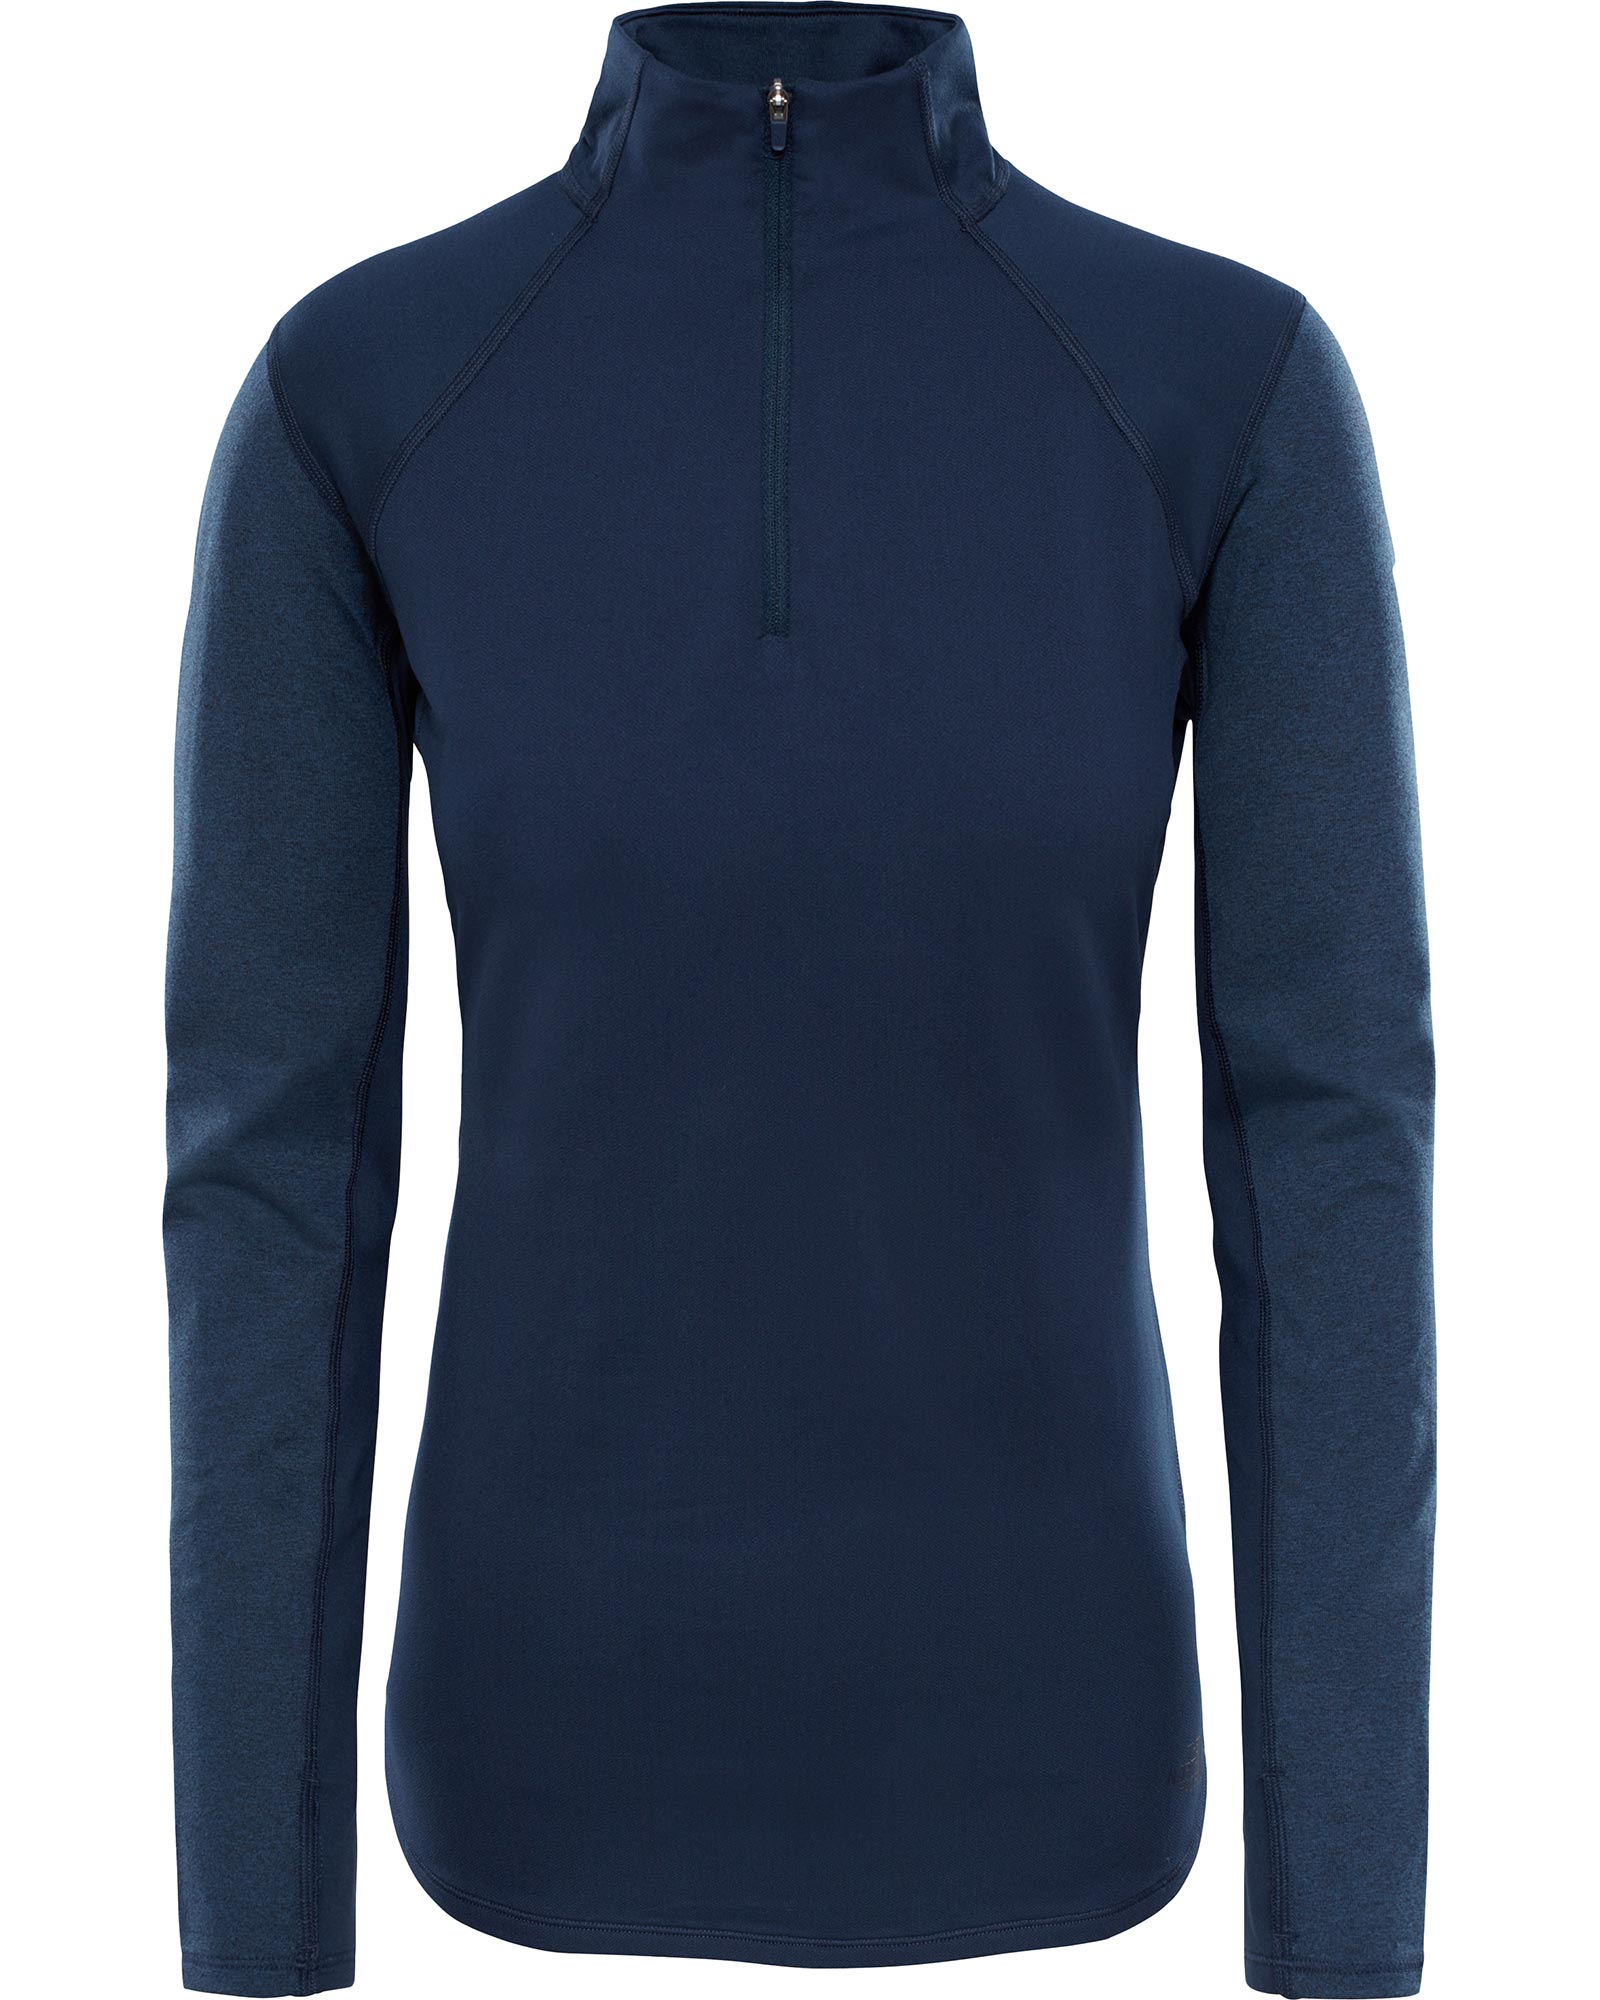 The North Face Motivation Womens 1/4 Zip Top